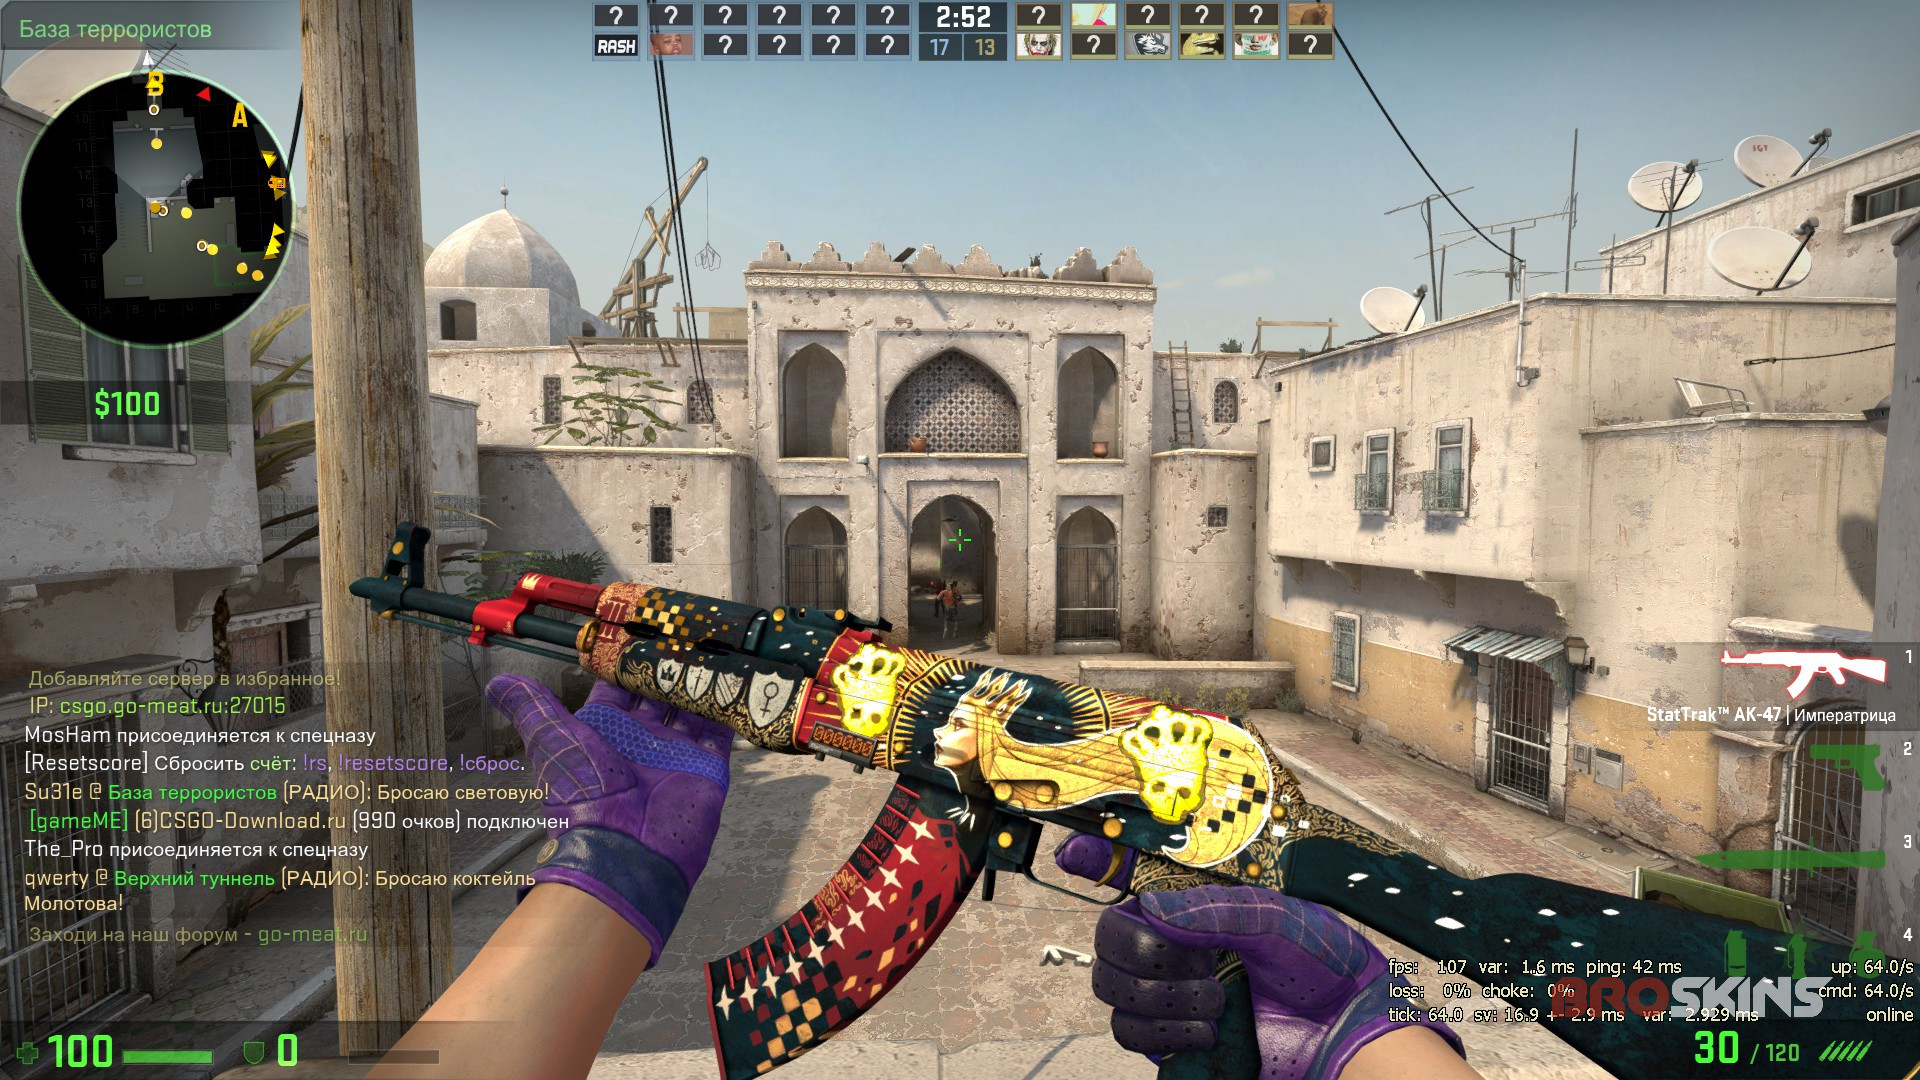 2x Crown (Foil)  StatTrak™ AK-47 The Empress and Driver Gloves Imperial Plaid